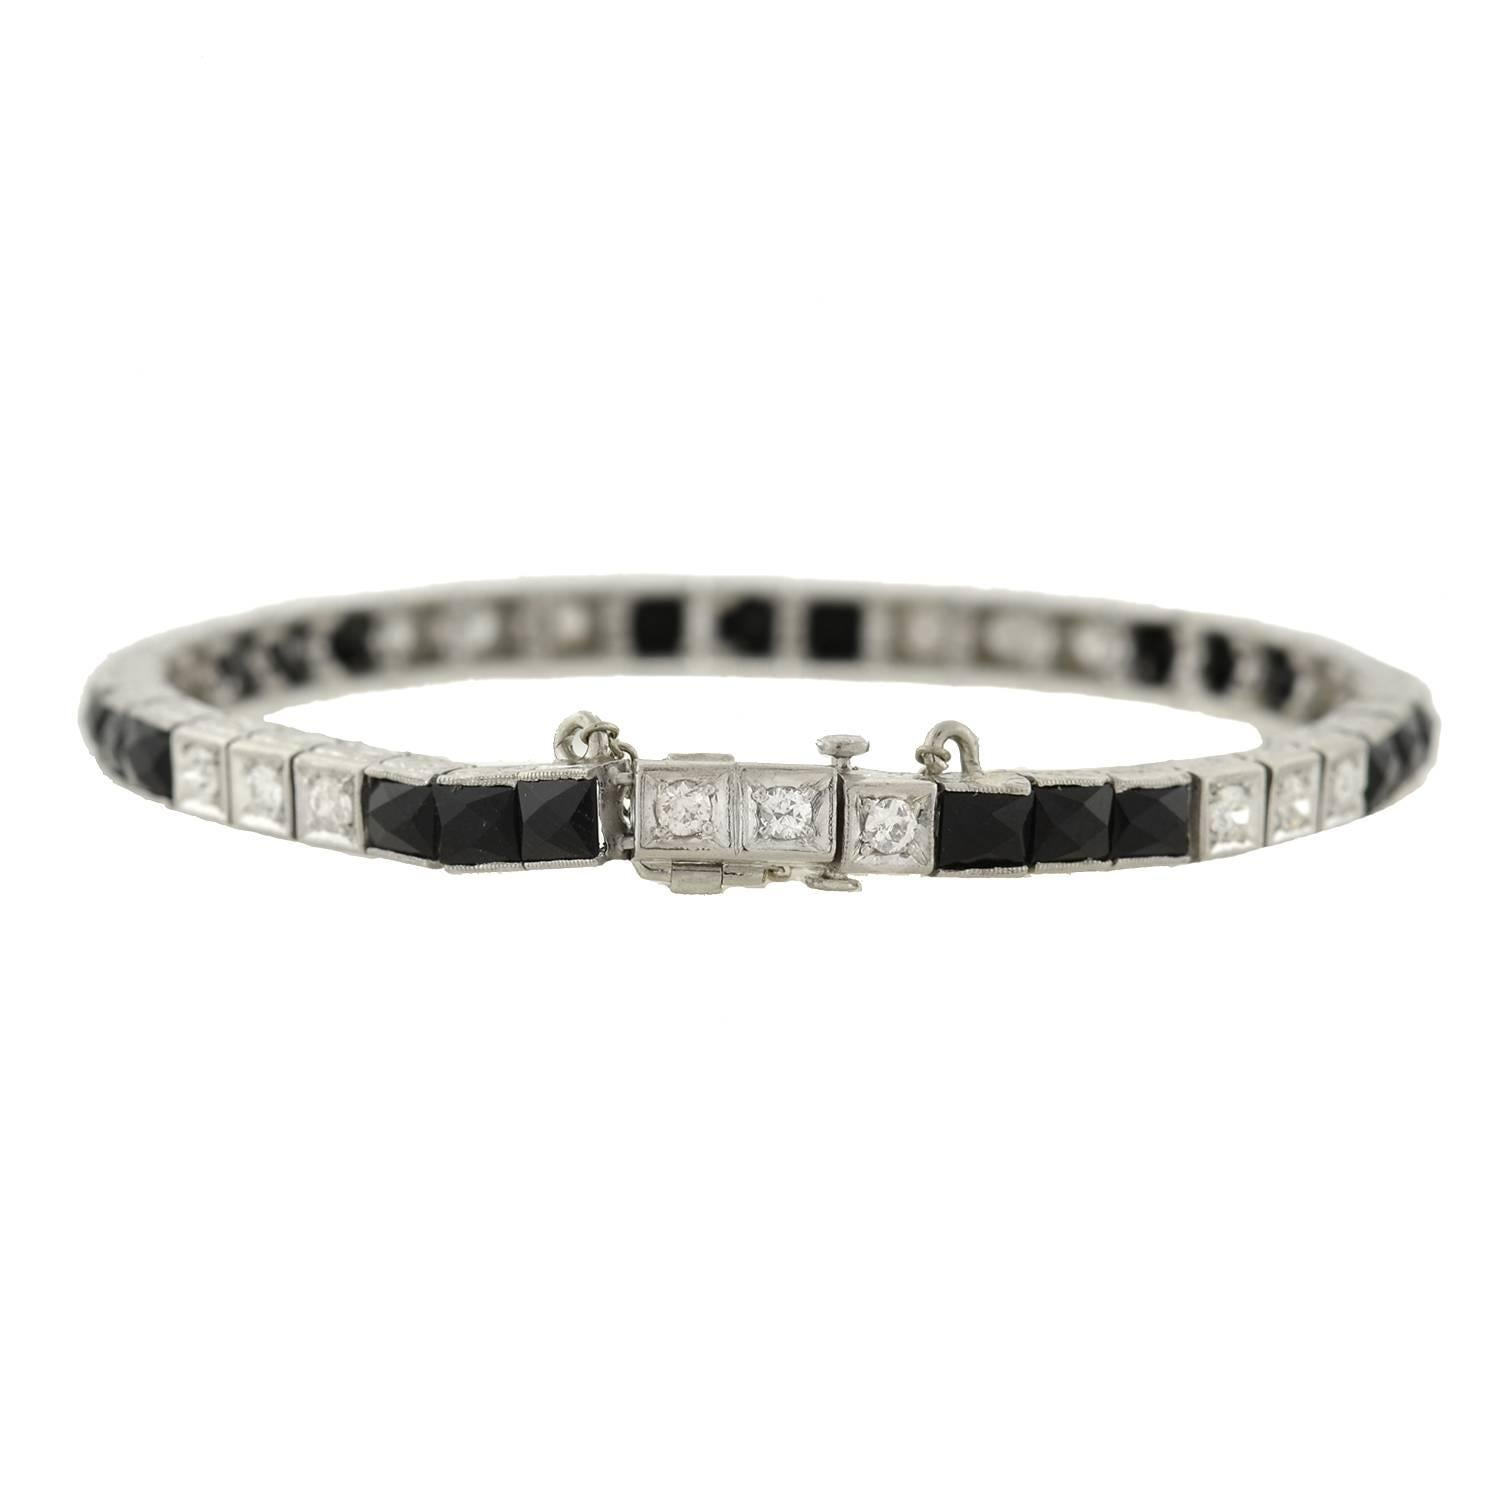 A gorgeous onyx and diamond line bracelet from the Art Deco era (ca1920)! This beautiful platinum bracelet features 21 French Cut onyx stone and 21 sparkling diamonds, which wrap around the entire length of the piece. The stones form an alternating